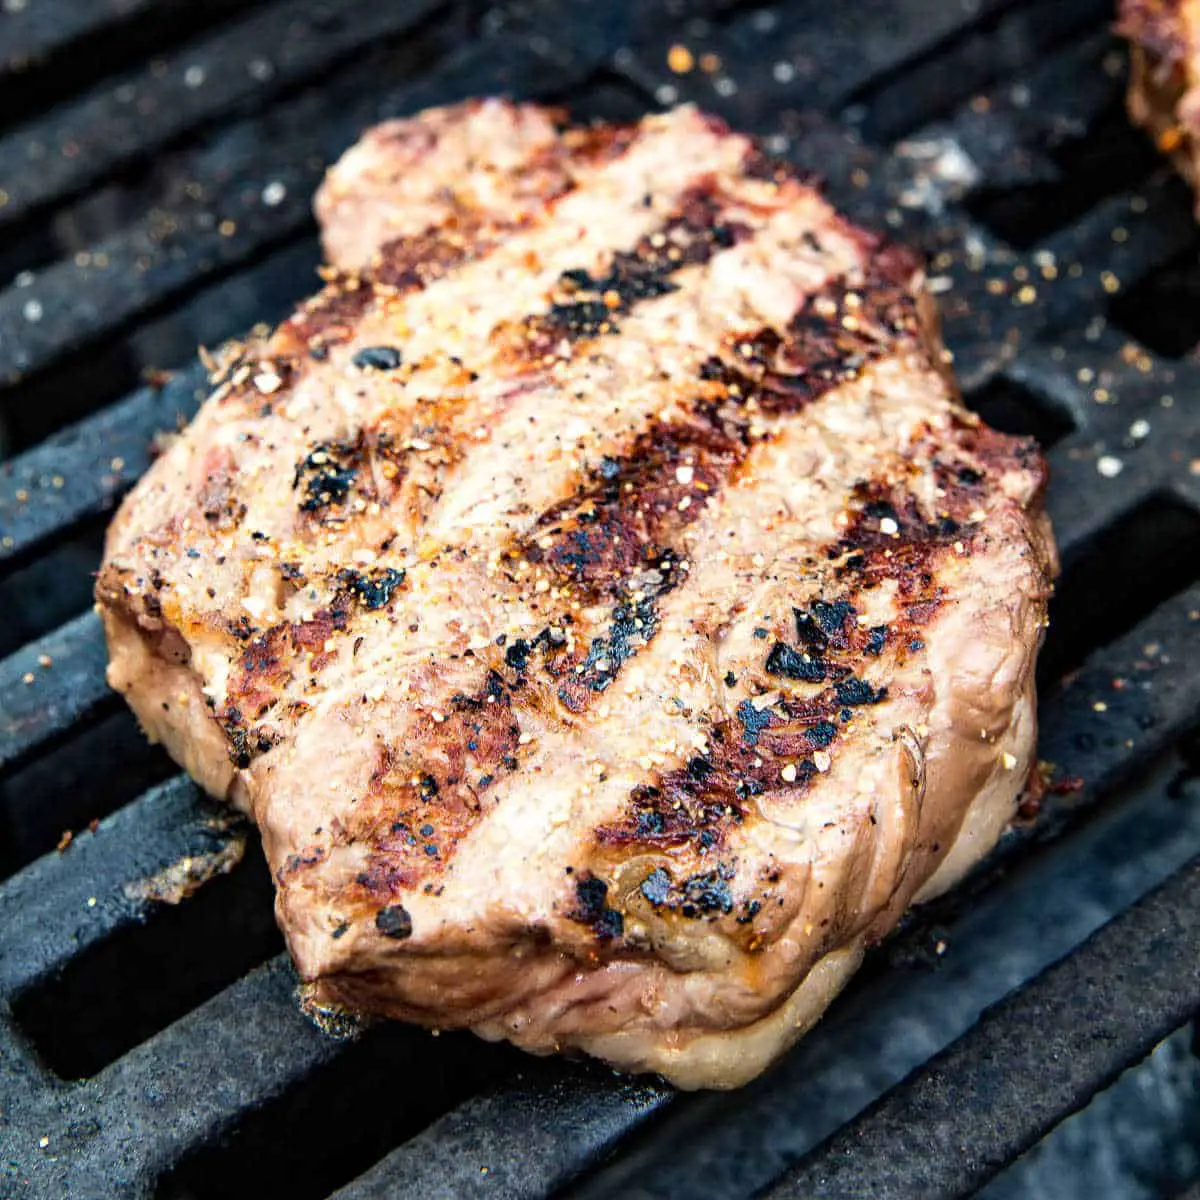 How to Make Grilled Ribeye